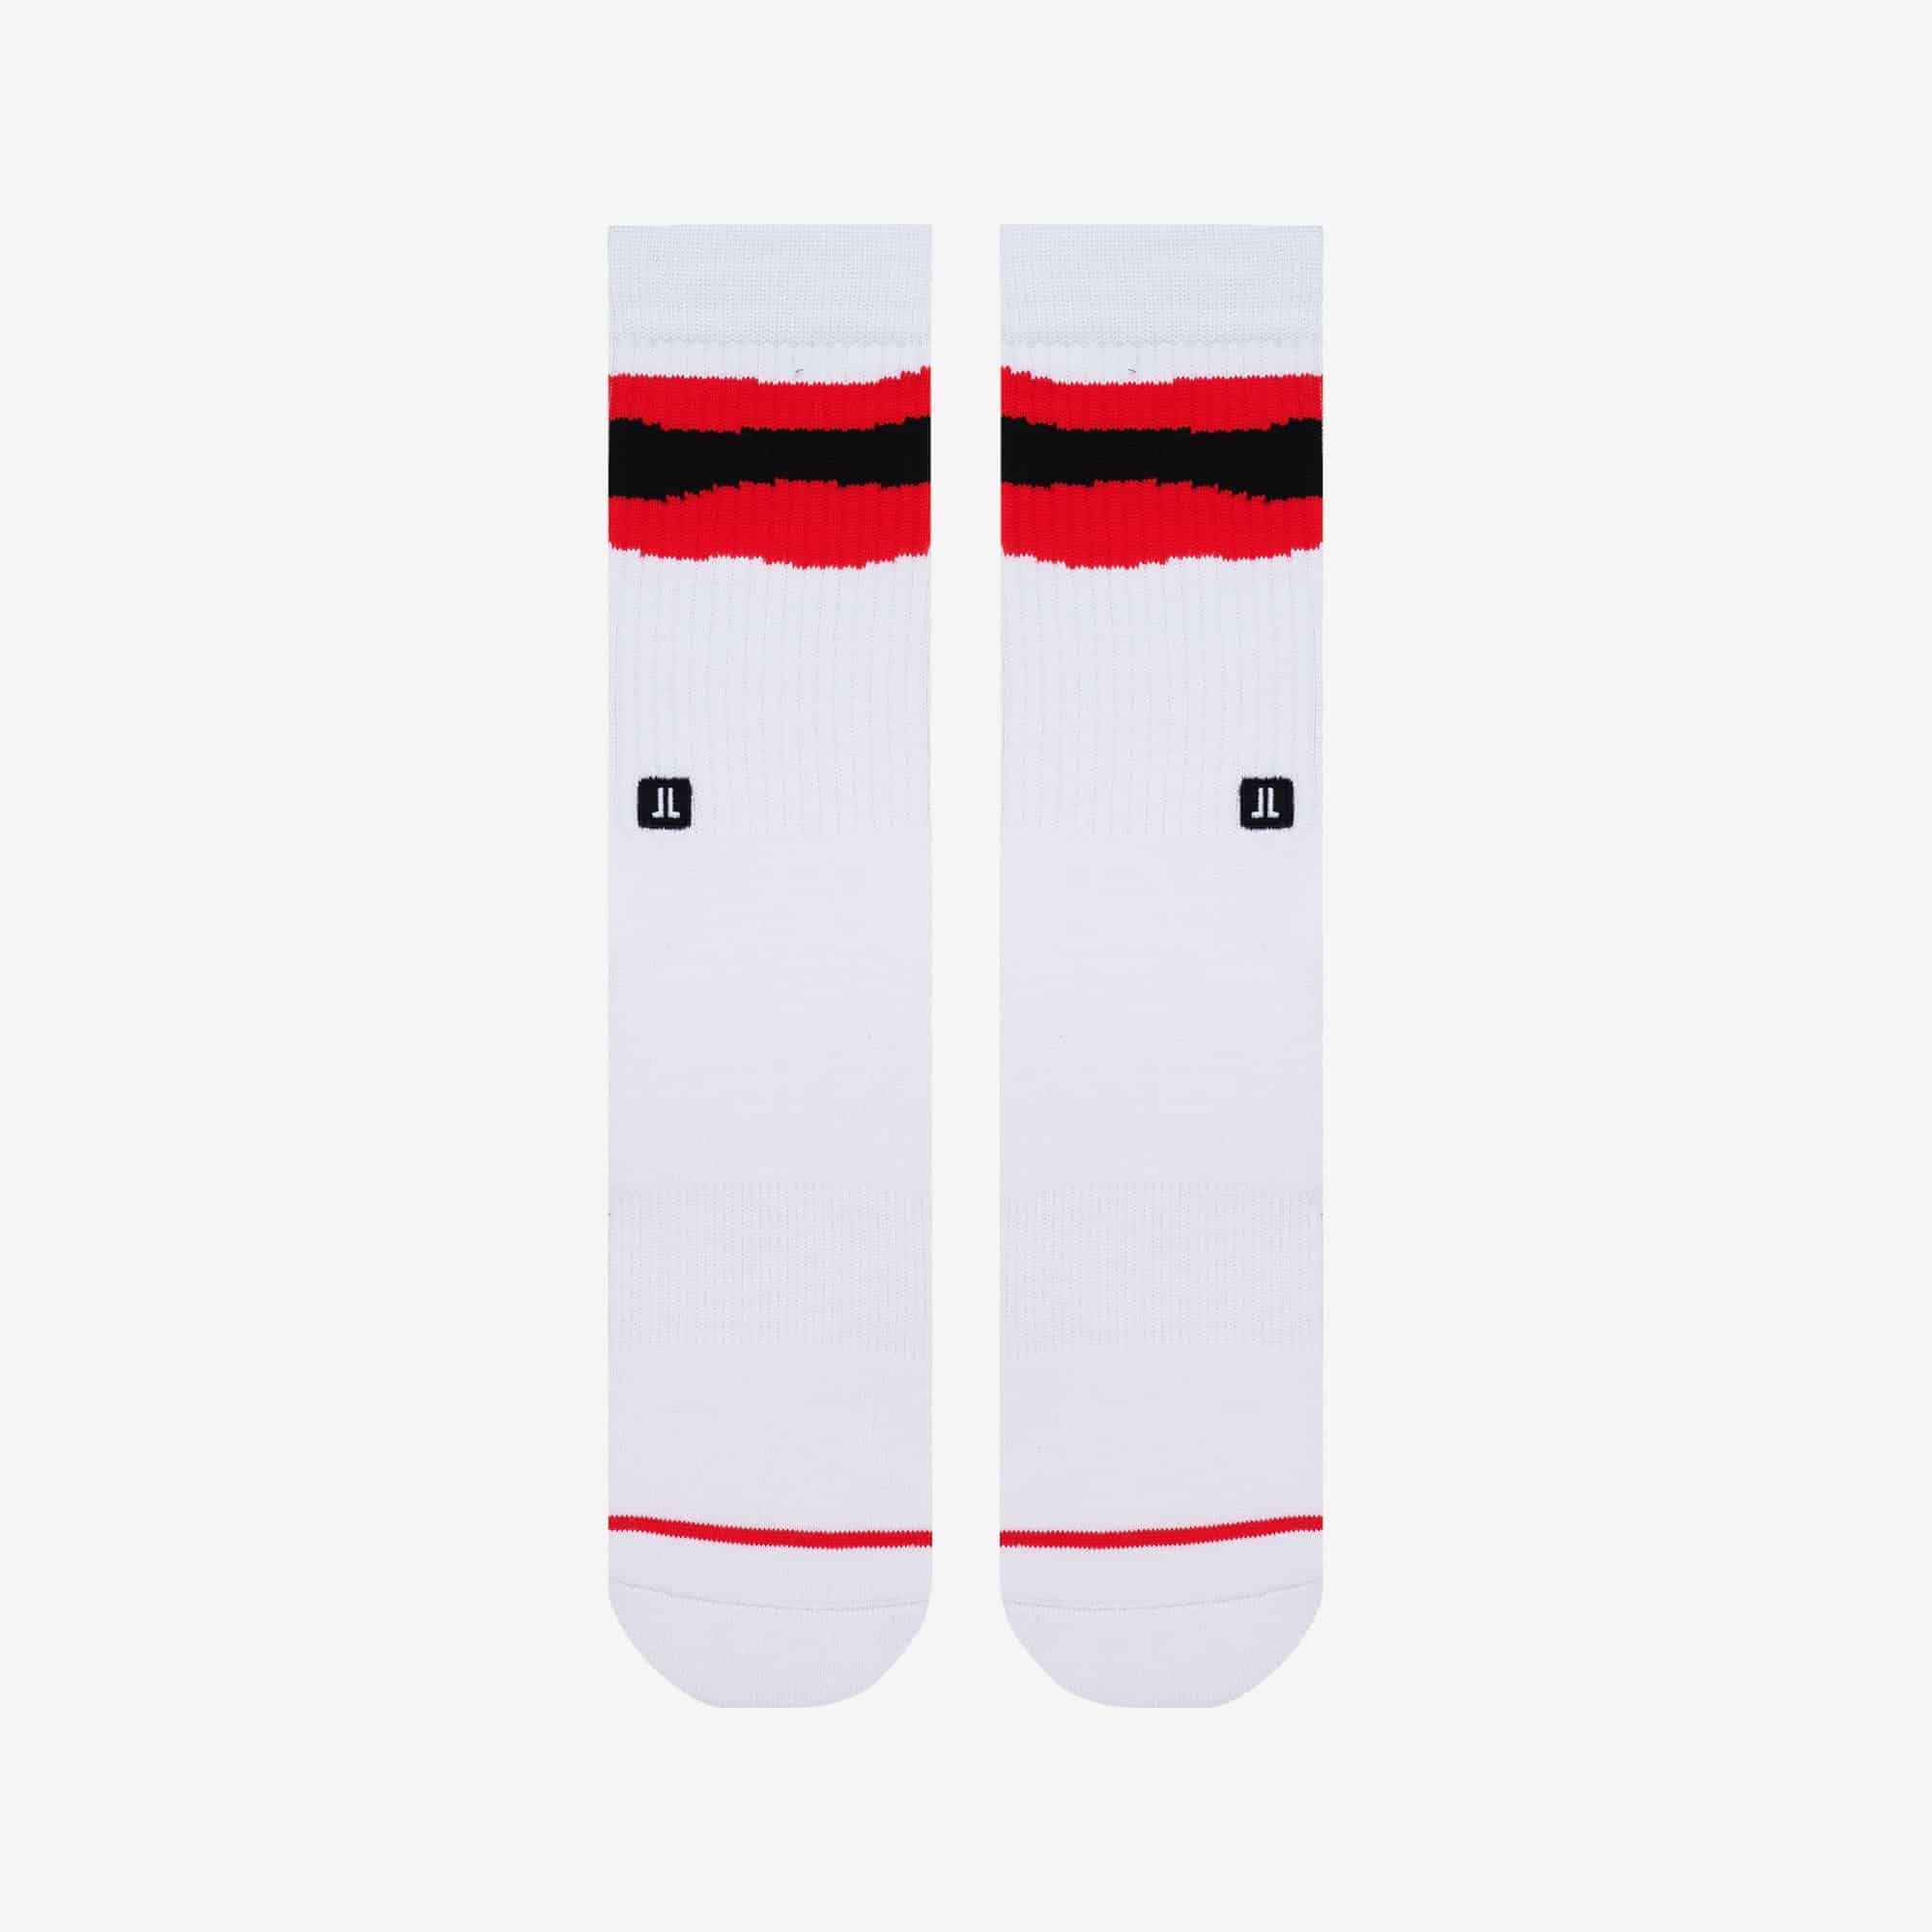 Asymmetry in Red | Designer Socks | Limited Edition